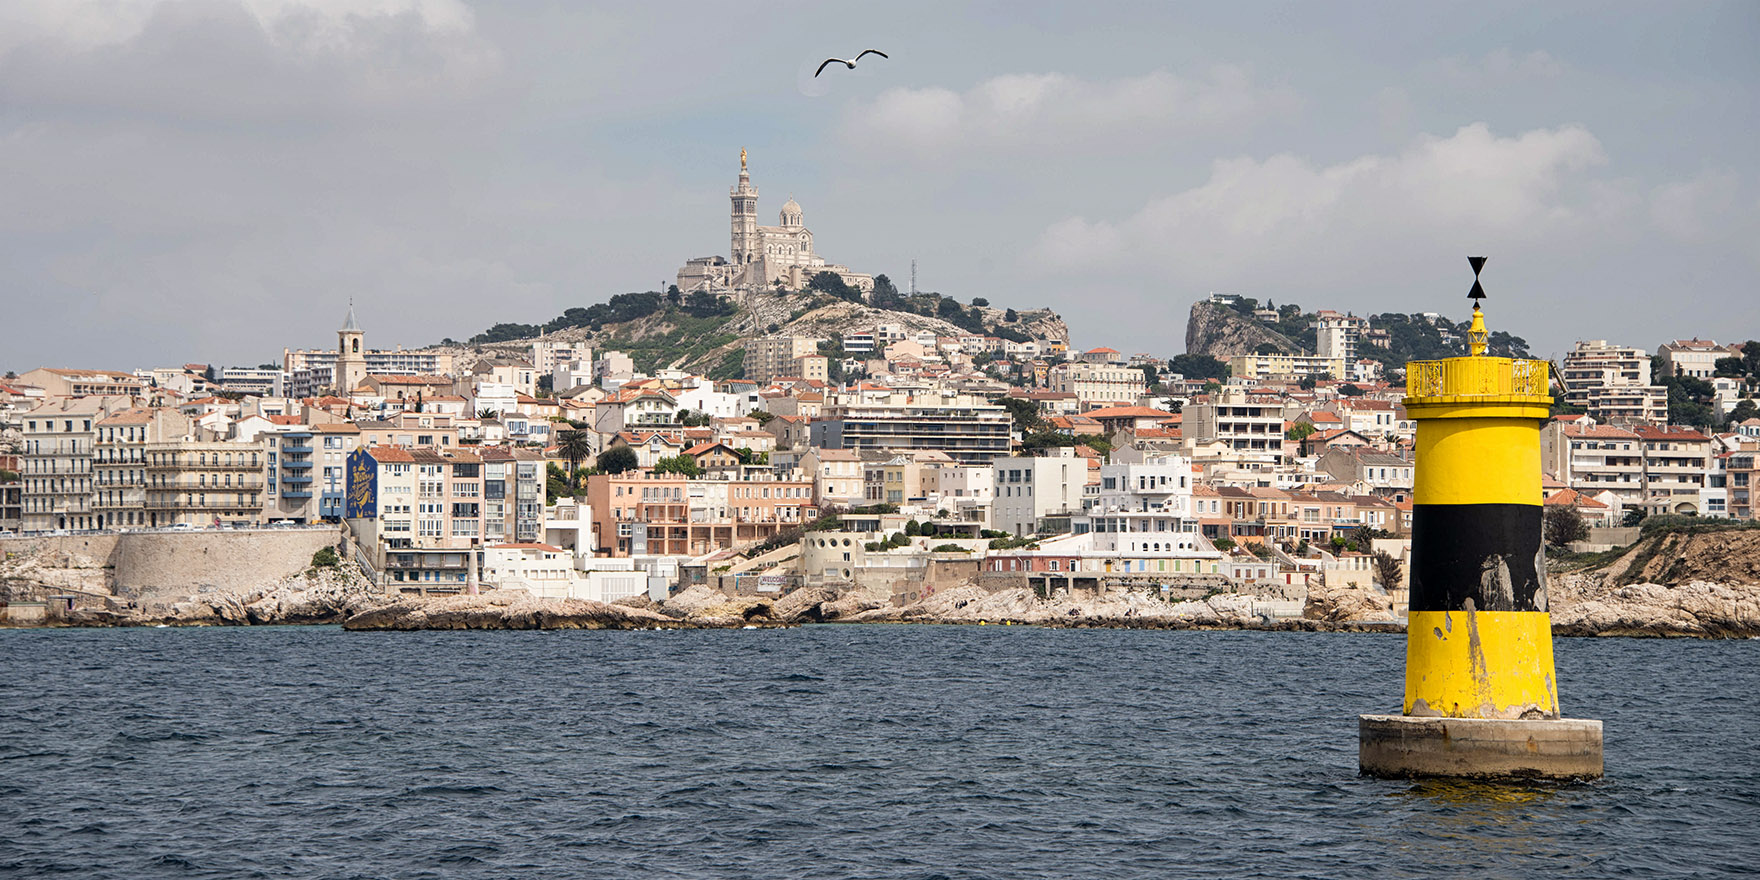 'Notre Dame de la Garde' seen from the boat from Frioul to Marseille, April 22, 2016